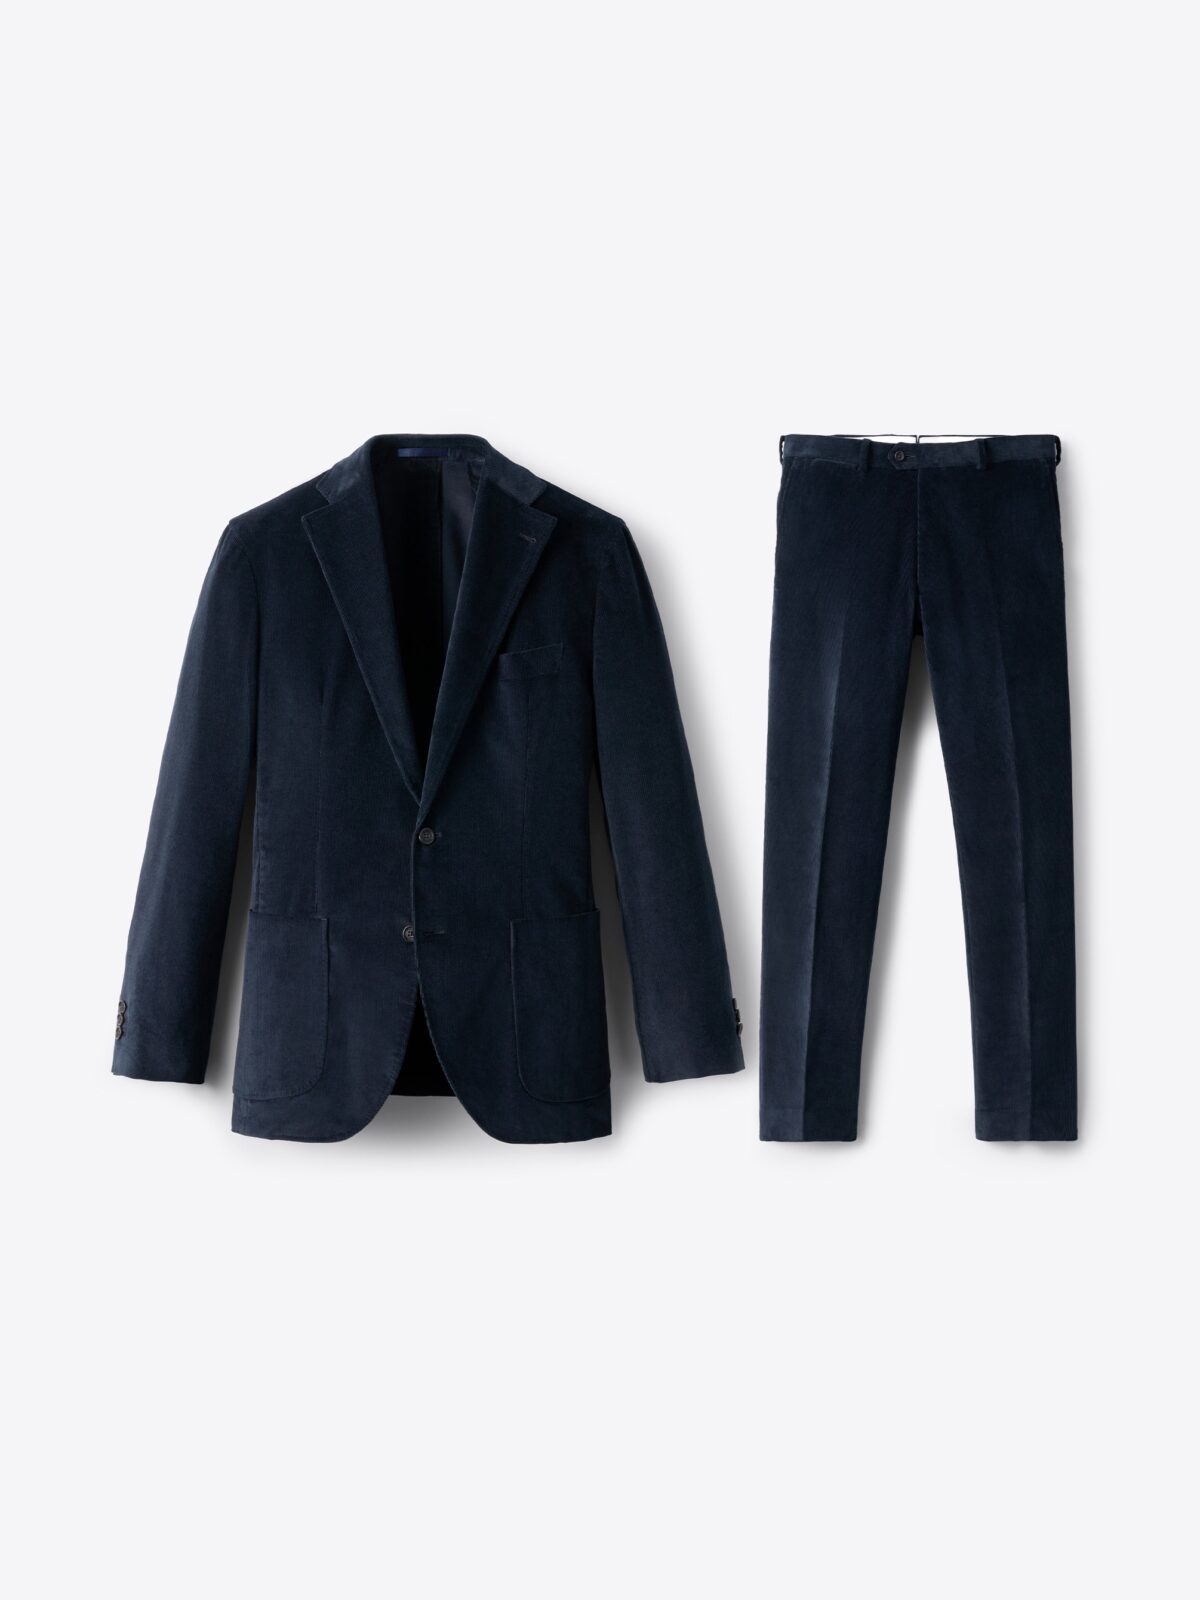 A Perfect Corduroy Suit for $150—Plus 5 Others If You're Picky